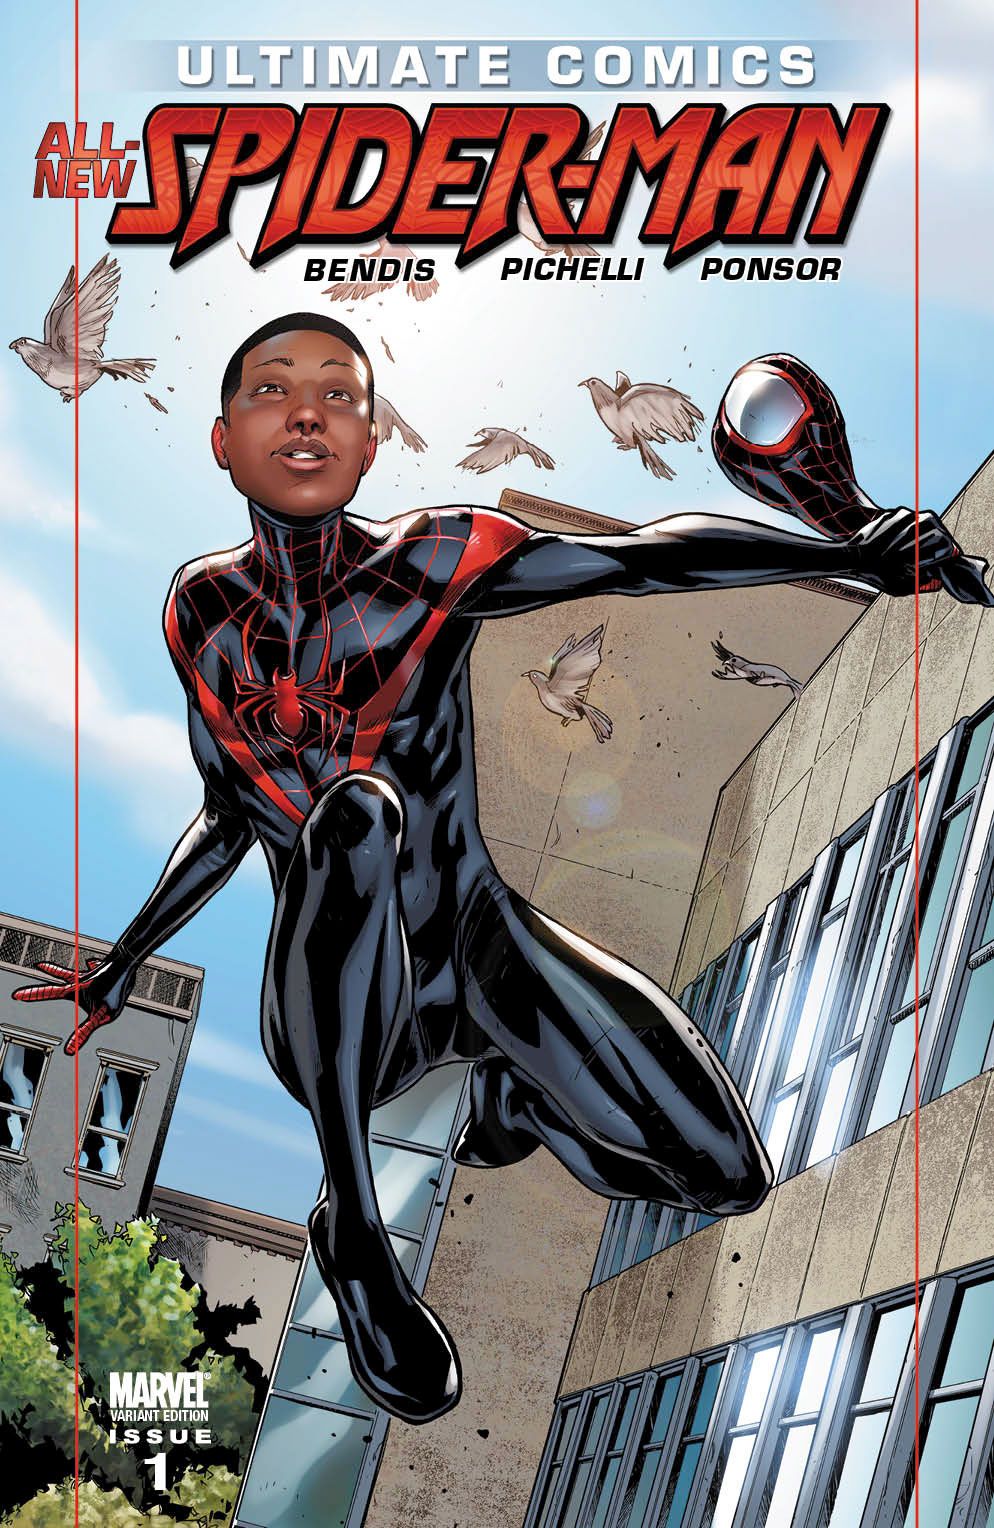 Miles Morales of 'Into the Spider-Verse': The Race Problem